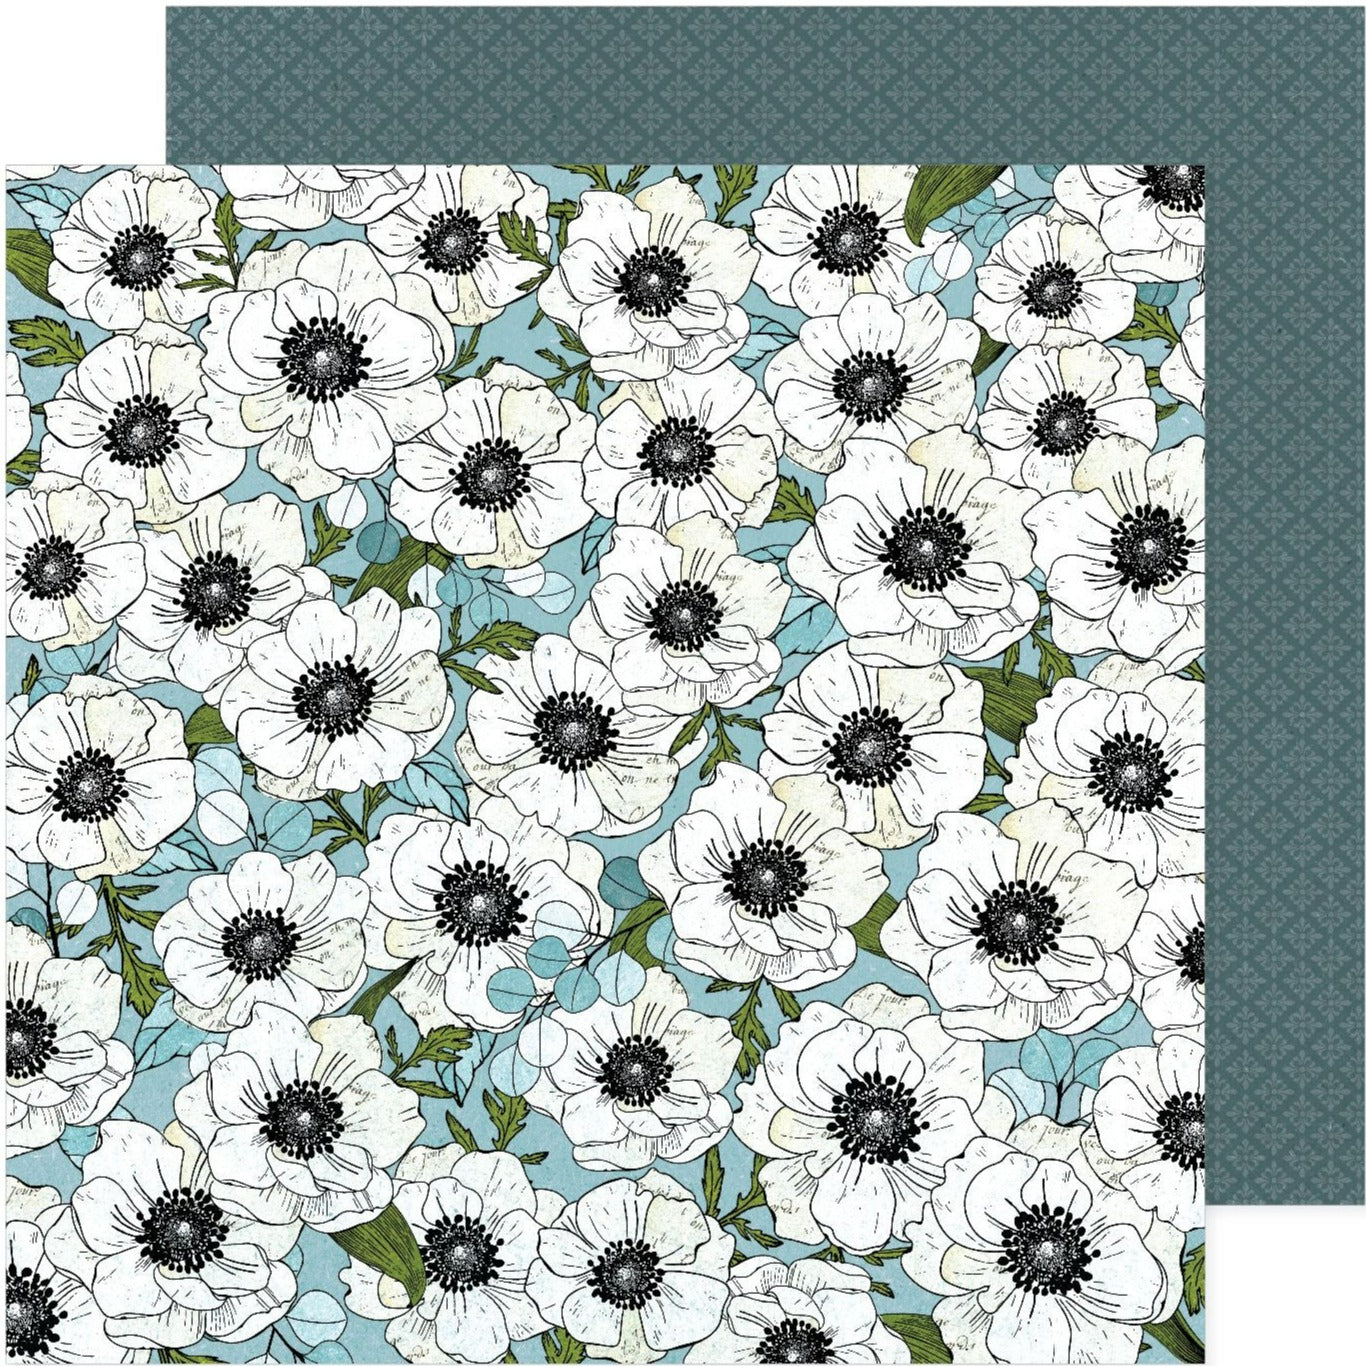 12x12 patterned cardstock. (Side A - beautiful white poppies on a turquoise background, Side B - dark turquoise vintage pattern) - Archival-safe and acid-free from American Crafts